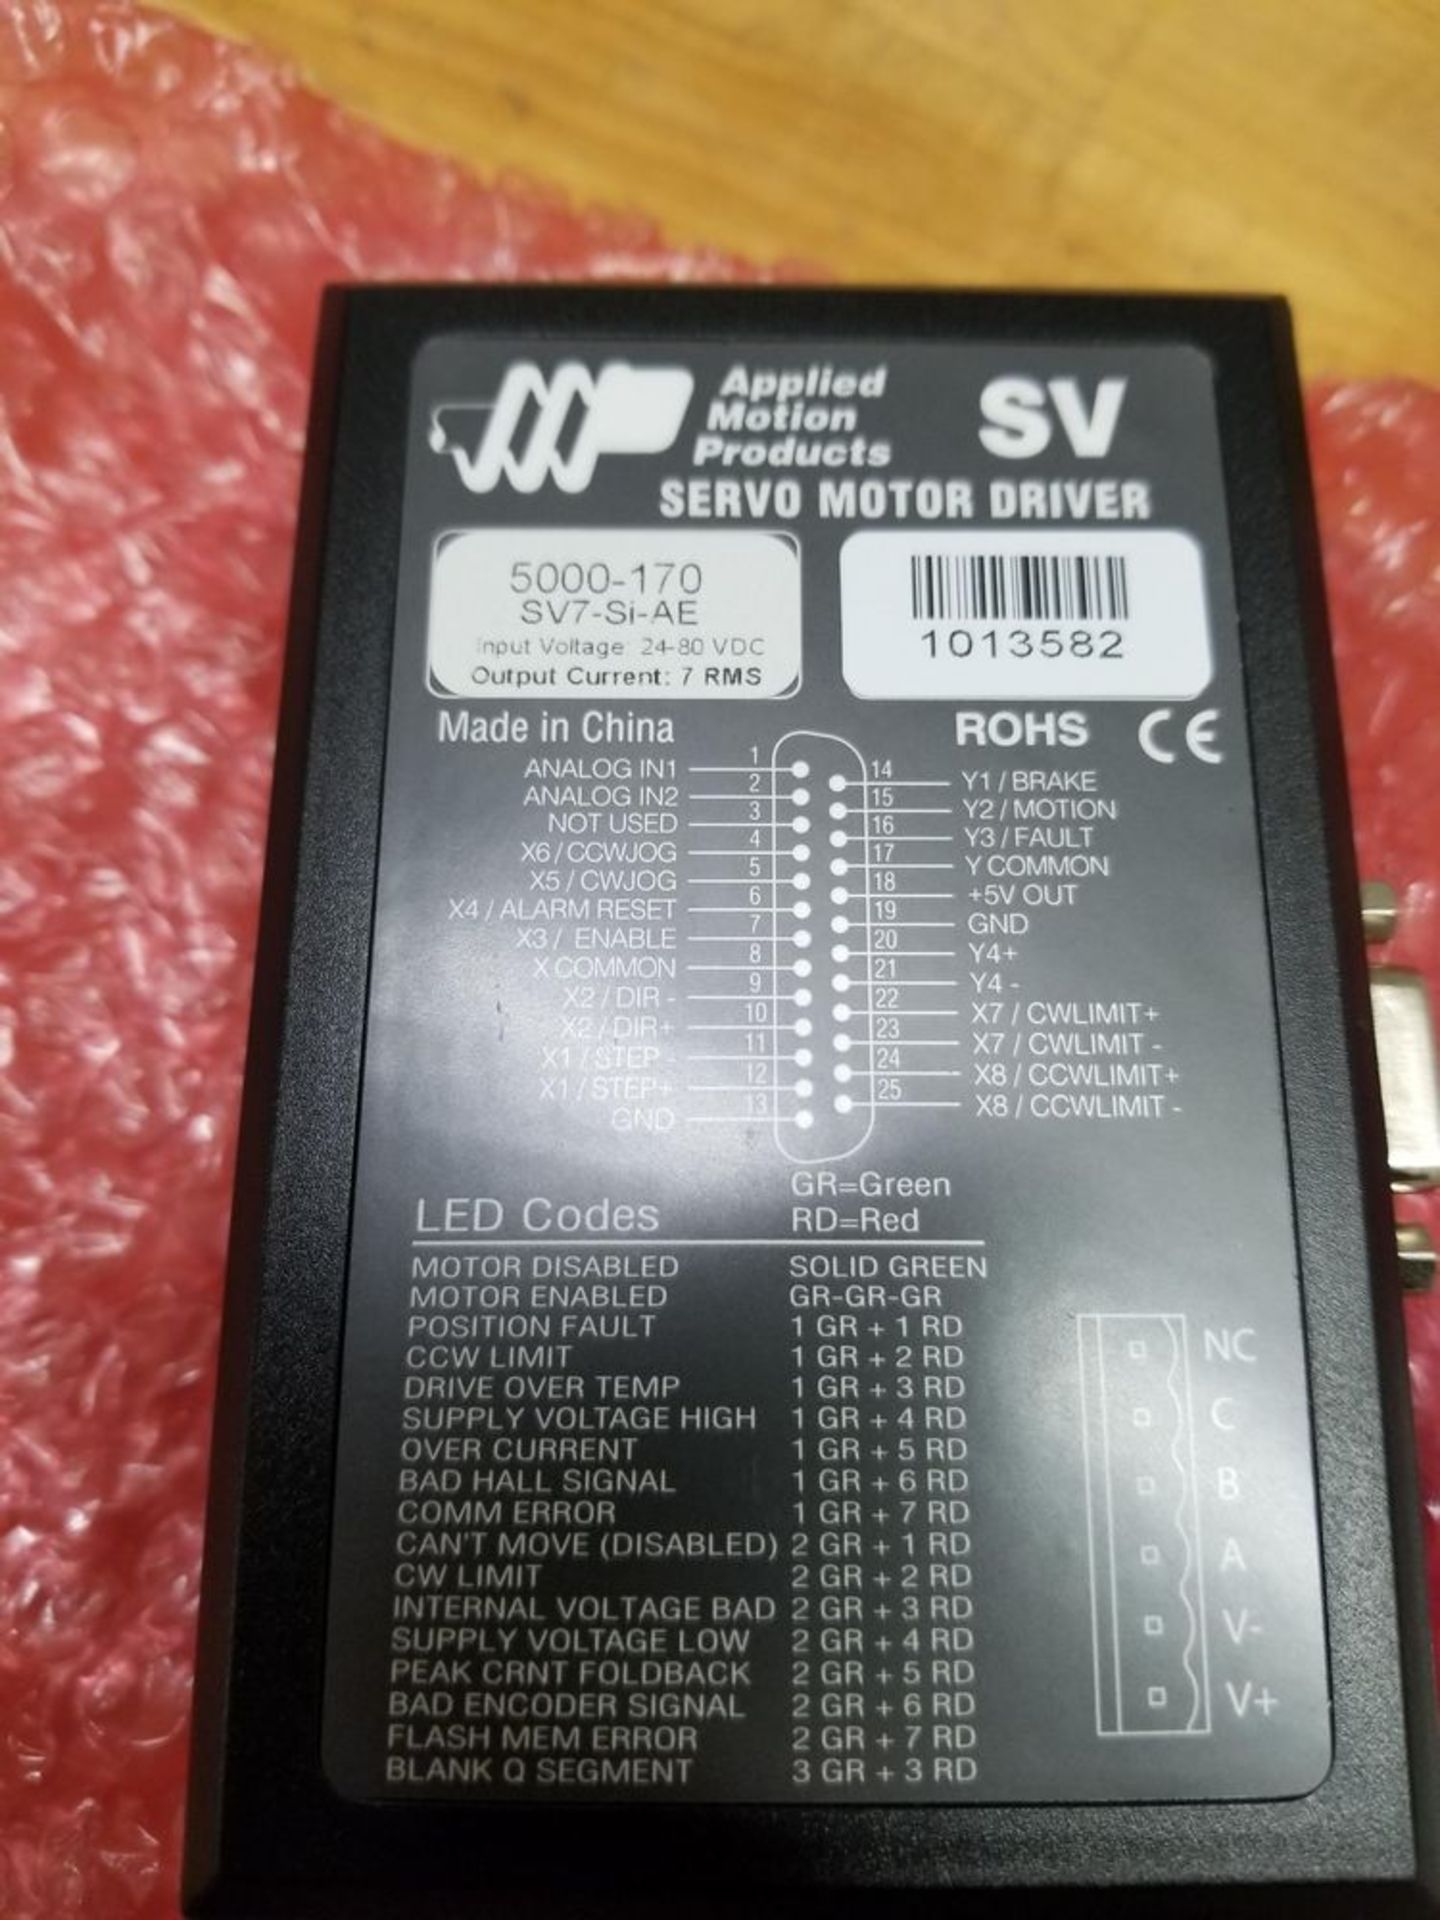 NEW APPLIED MOTION SV7-Si-AE SERVO MOTOR DRIVE - Image 5 of 7